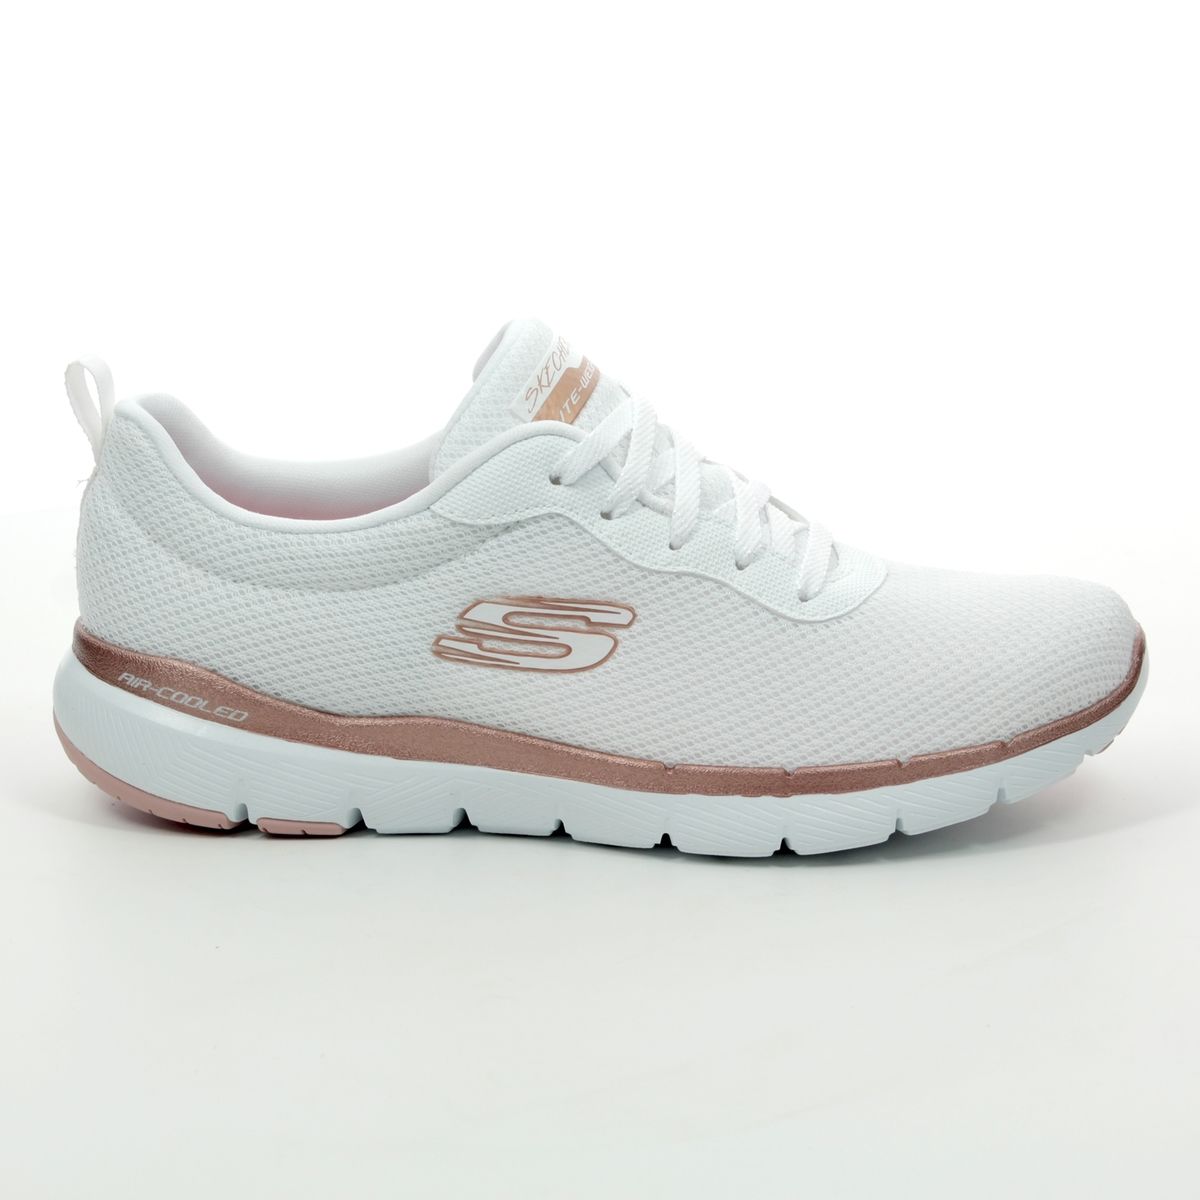 white and rose gold sketchers